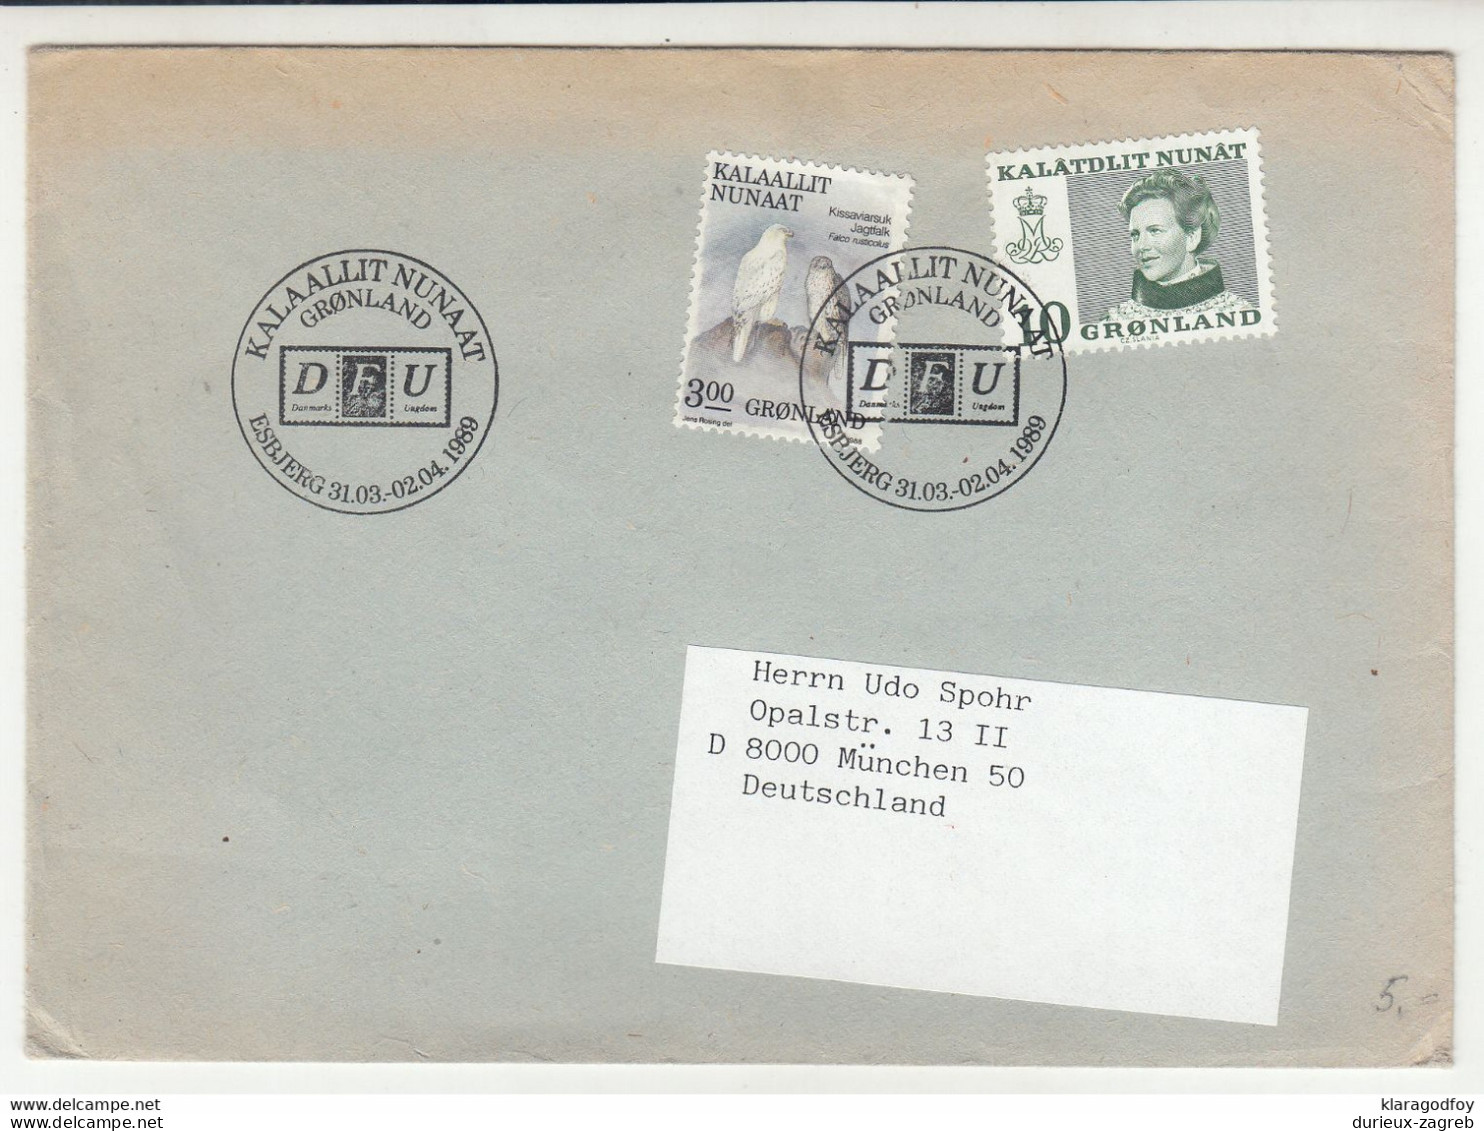 Greenland, Letter Cover Posted 1989 B210820 - Storia Postale